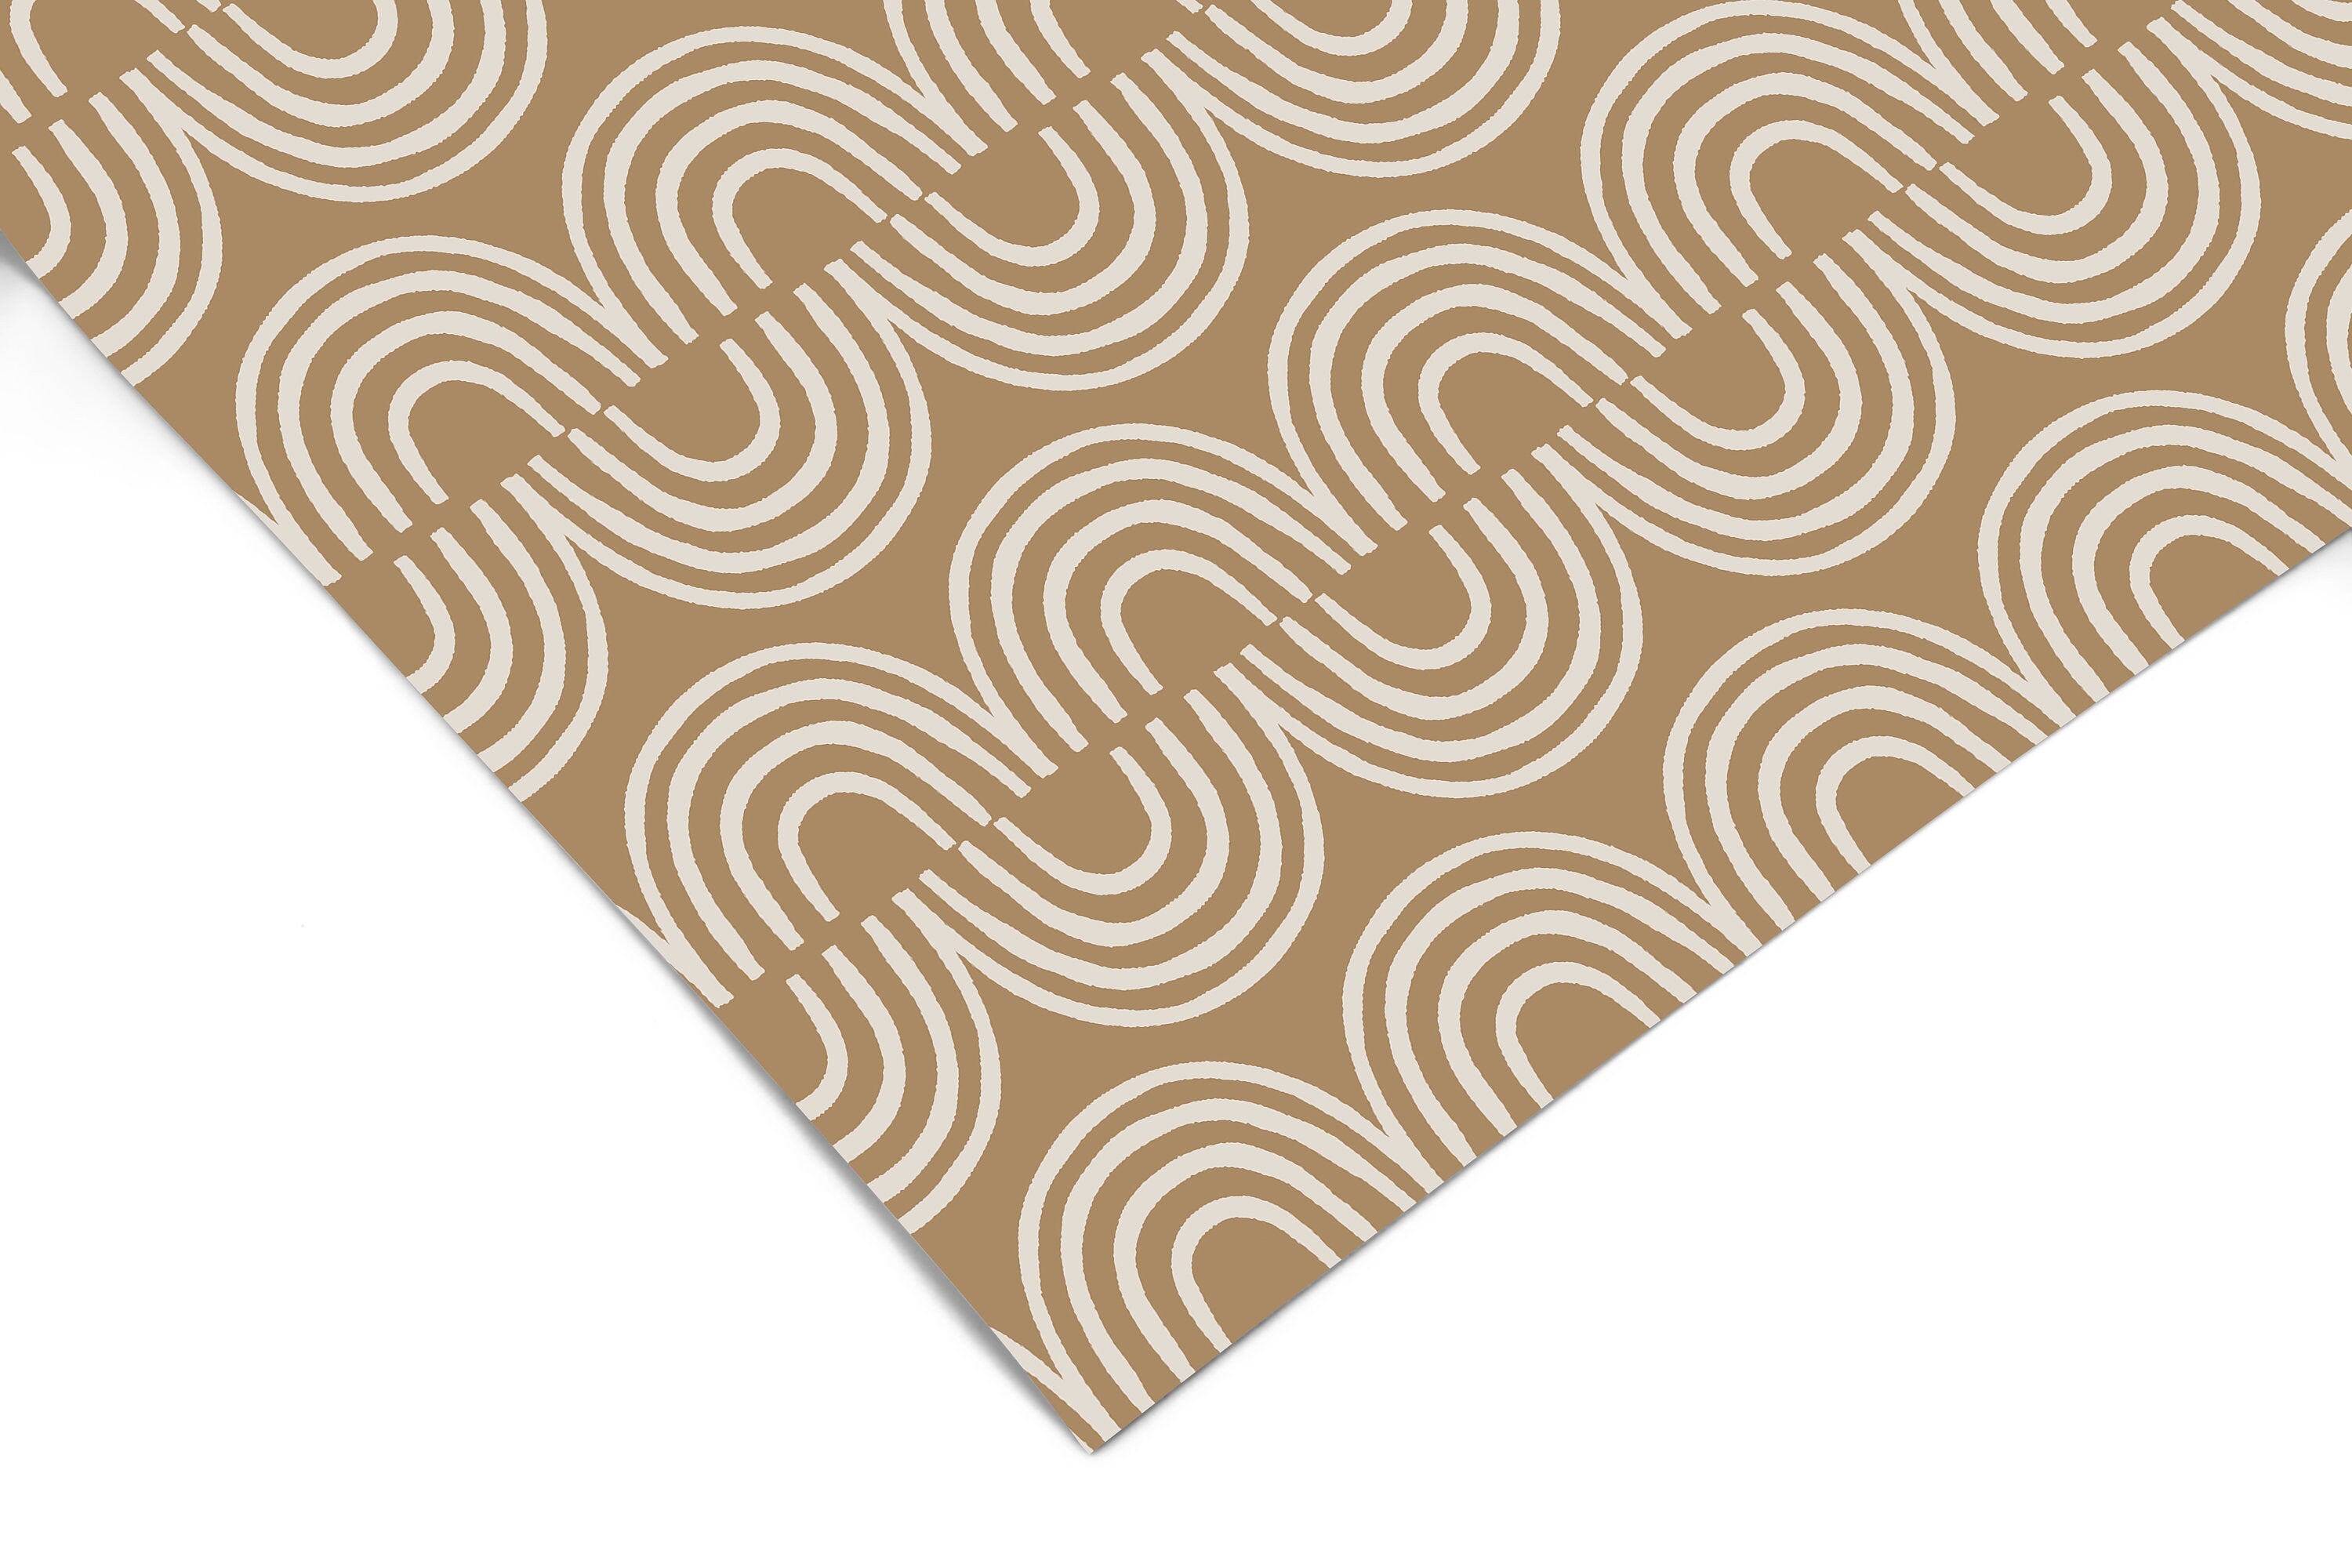 Contact Paper Tan And Cream Pattern | Peel And Stick Wallpaper | Removable Wallpaper | Shelf Liner | Drawer Liner | Peel and Stick Paper 870 - JamesAndColors